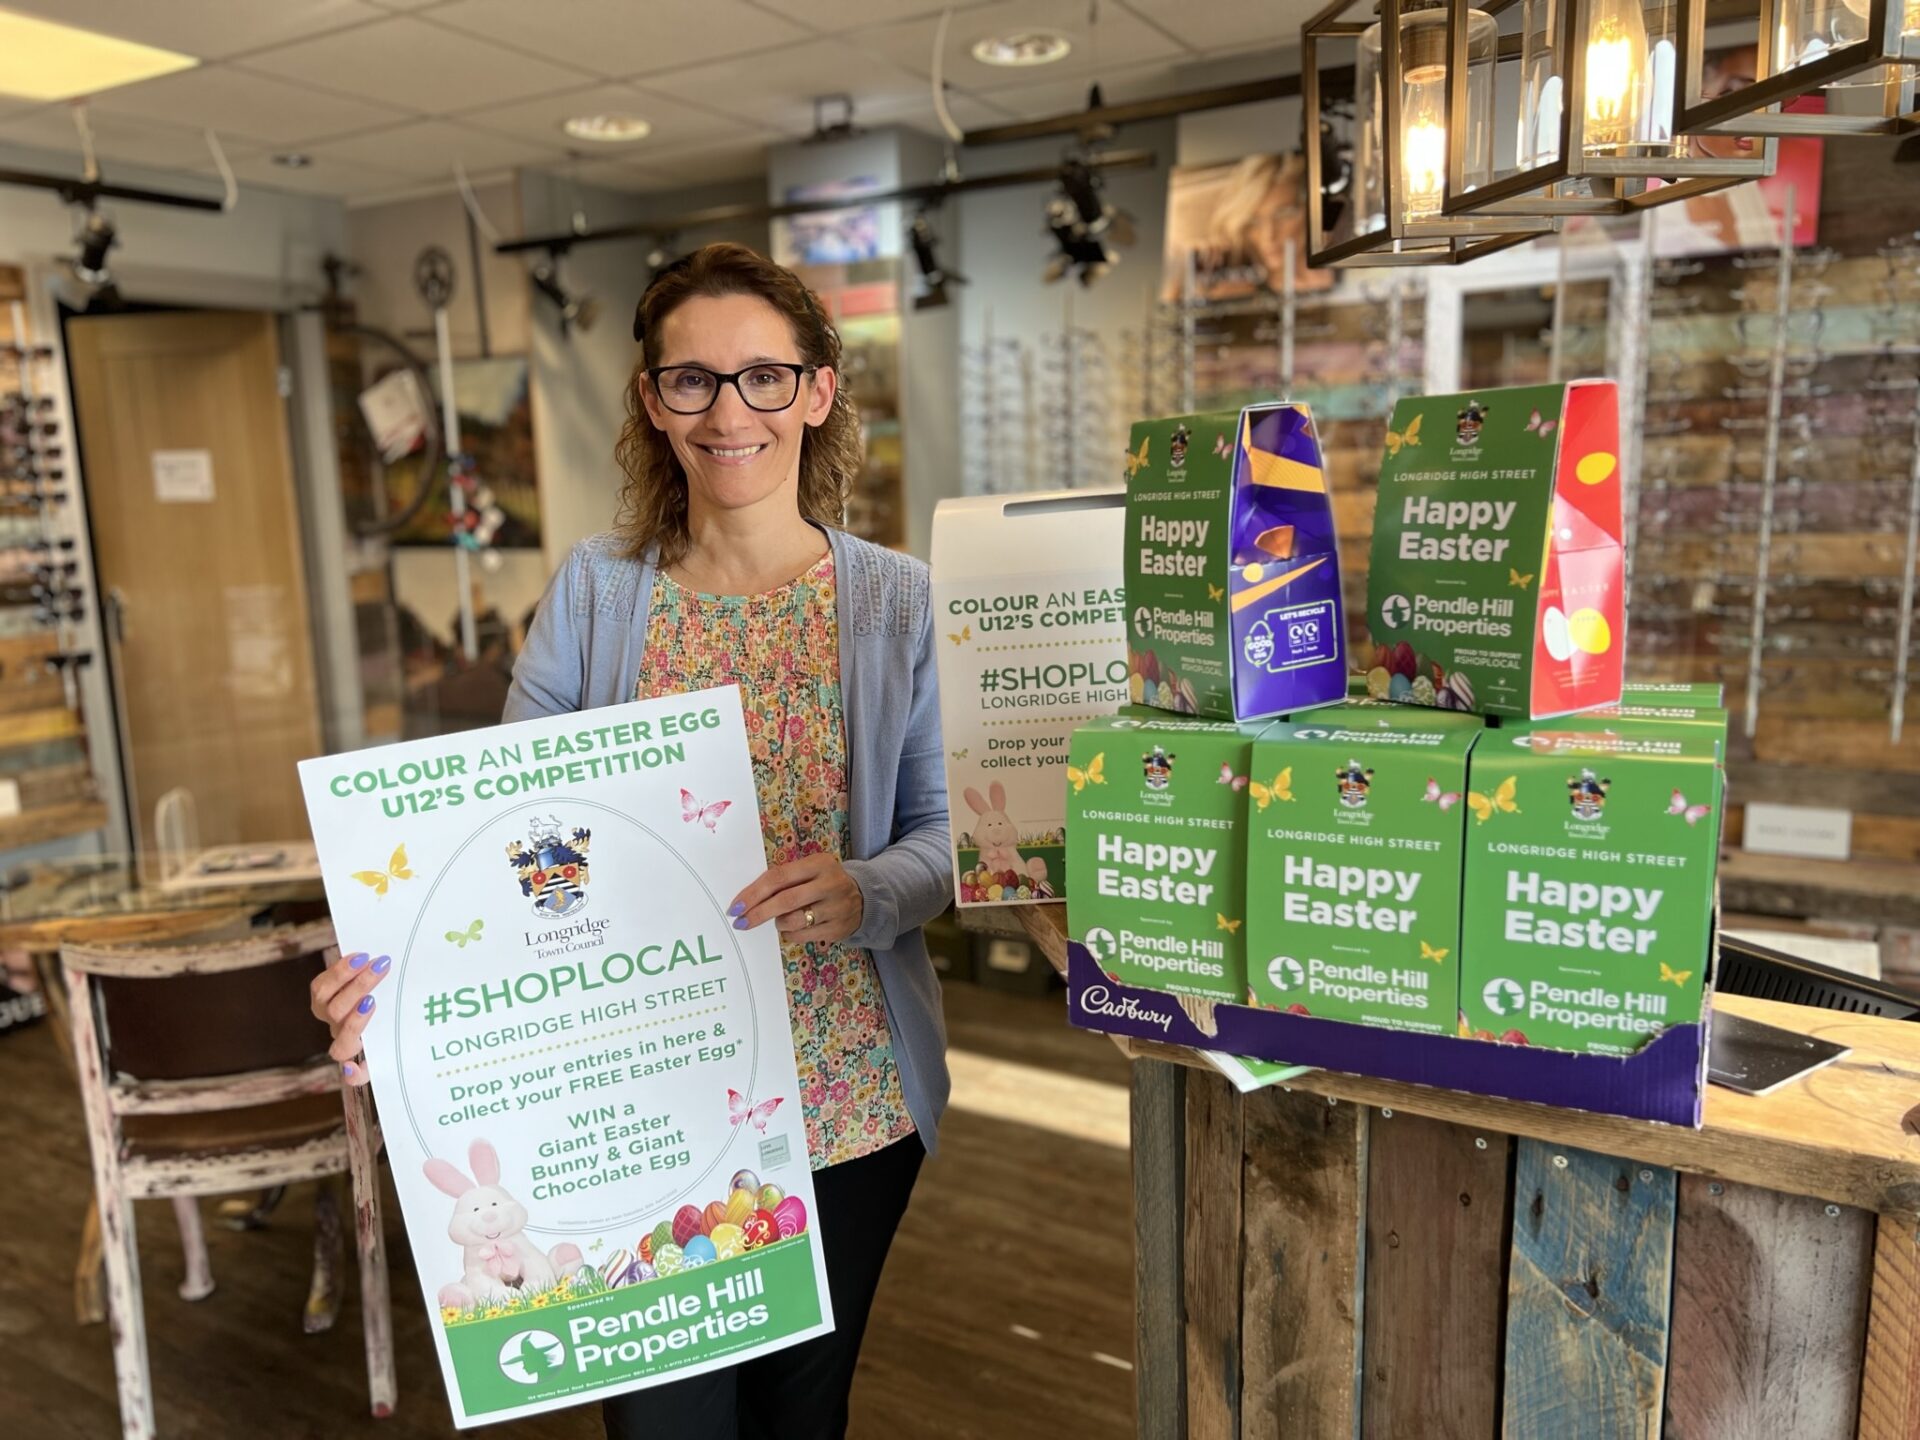 Local businesses are being encouraged to take part in the Pendle Hill Properties Shop Local Easter competition in Longridge